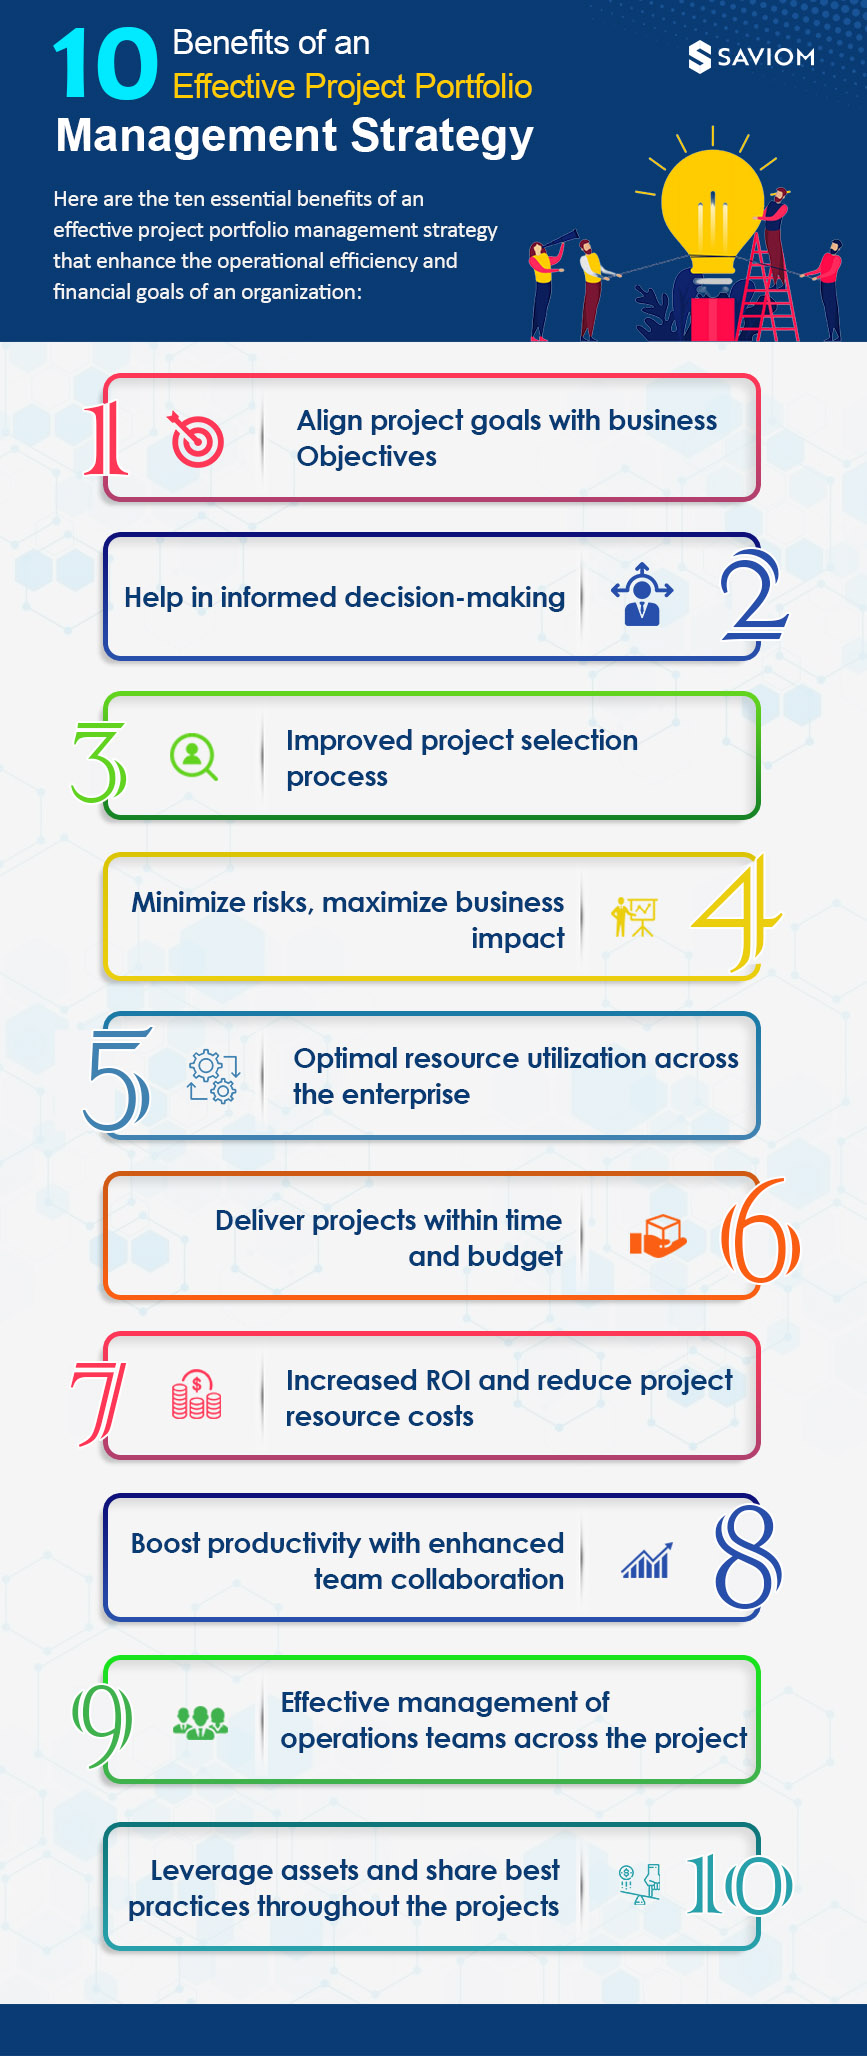 Understand 10 Benefits of an Effective Project Portfolio Management Strategy